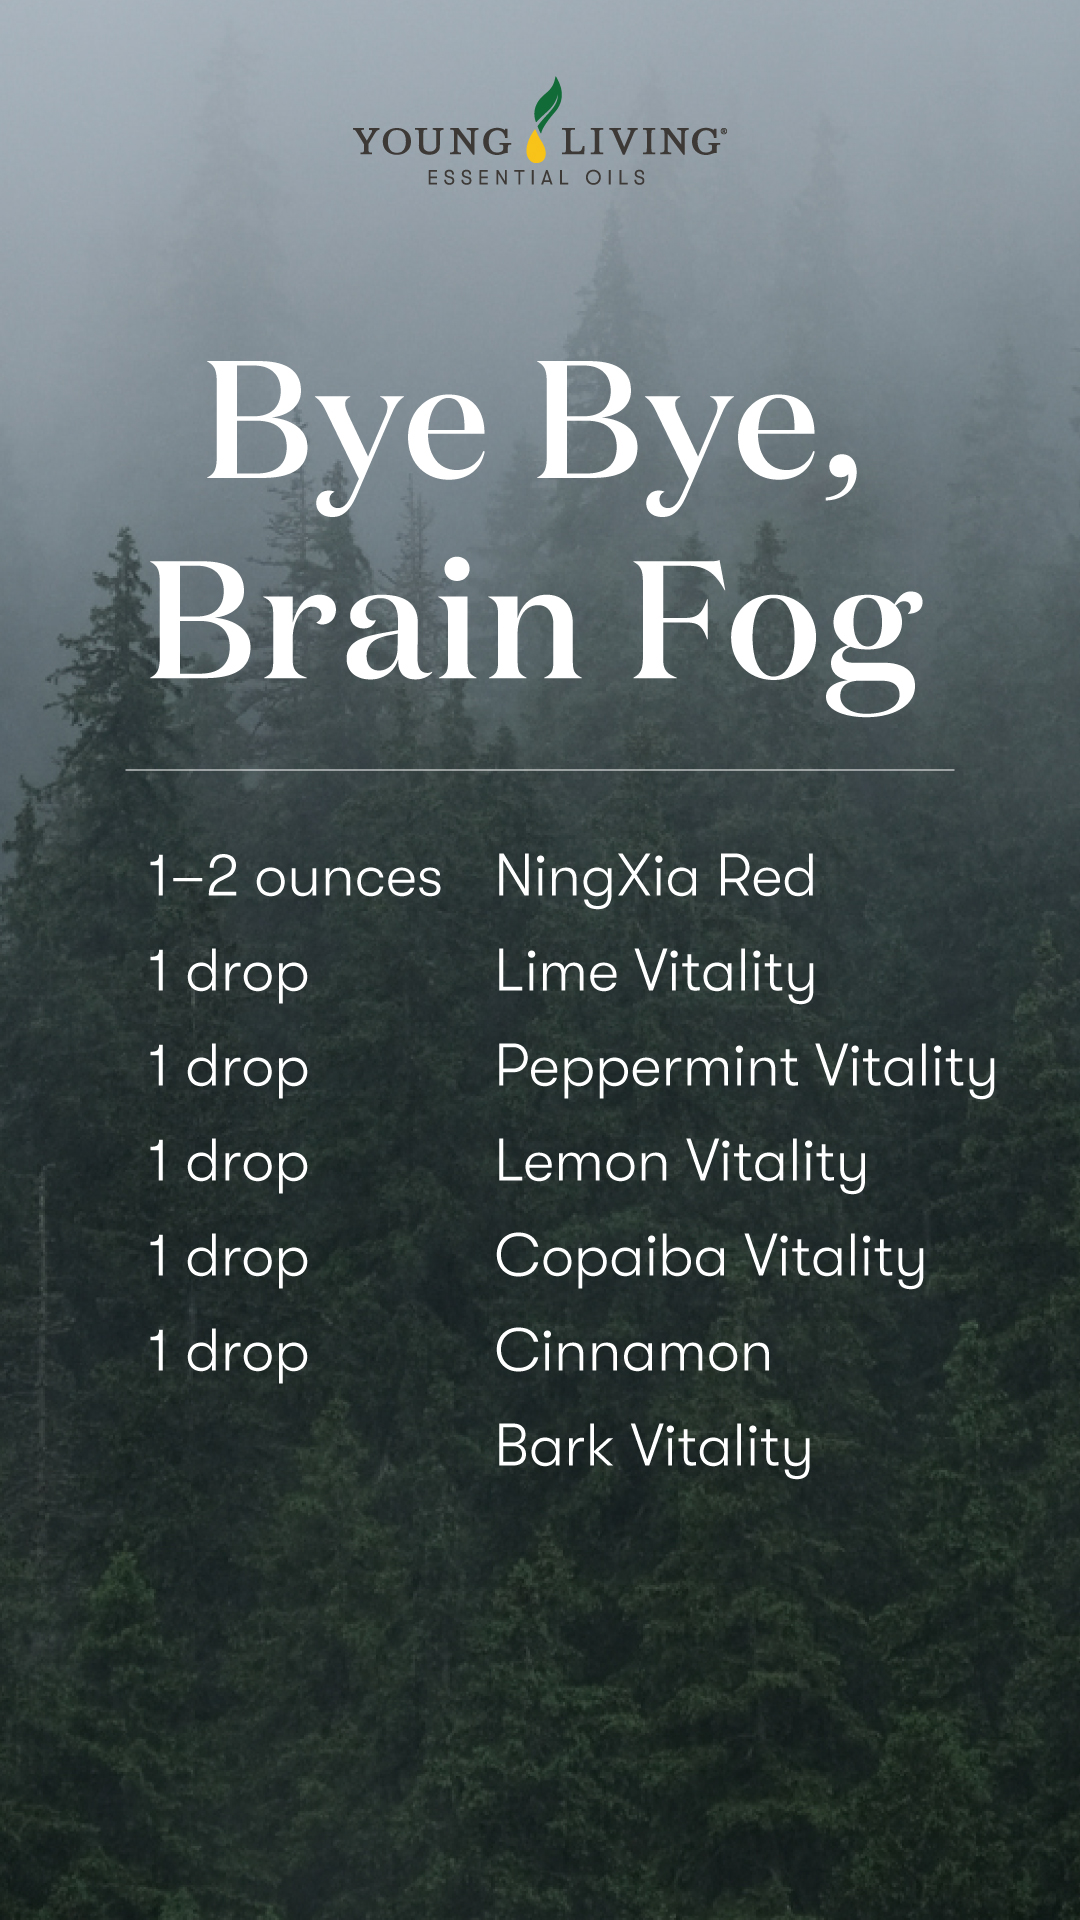 Bye Bye Brain Fog NingXia Red shot blend - • 1¬–2 ounces NingXia Red • 1 drop Lime Vitality essential oil • 1 drop Peppermint Vitality essential oil • 1 drop Lemon Vitality essential oil • 1 drop Copaiba Vitality essential oil • 1 drop Cinnamon Bark Vitality essential oil - Young Living Lavender Life Blog